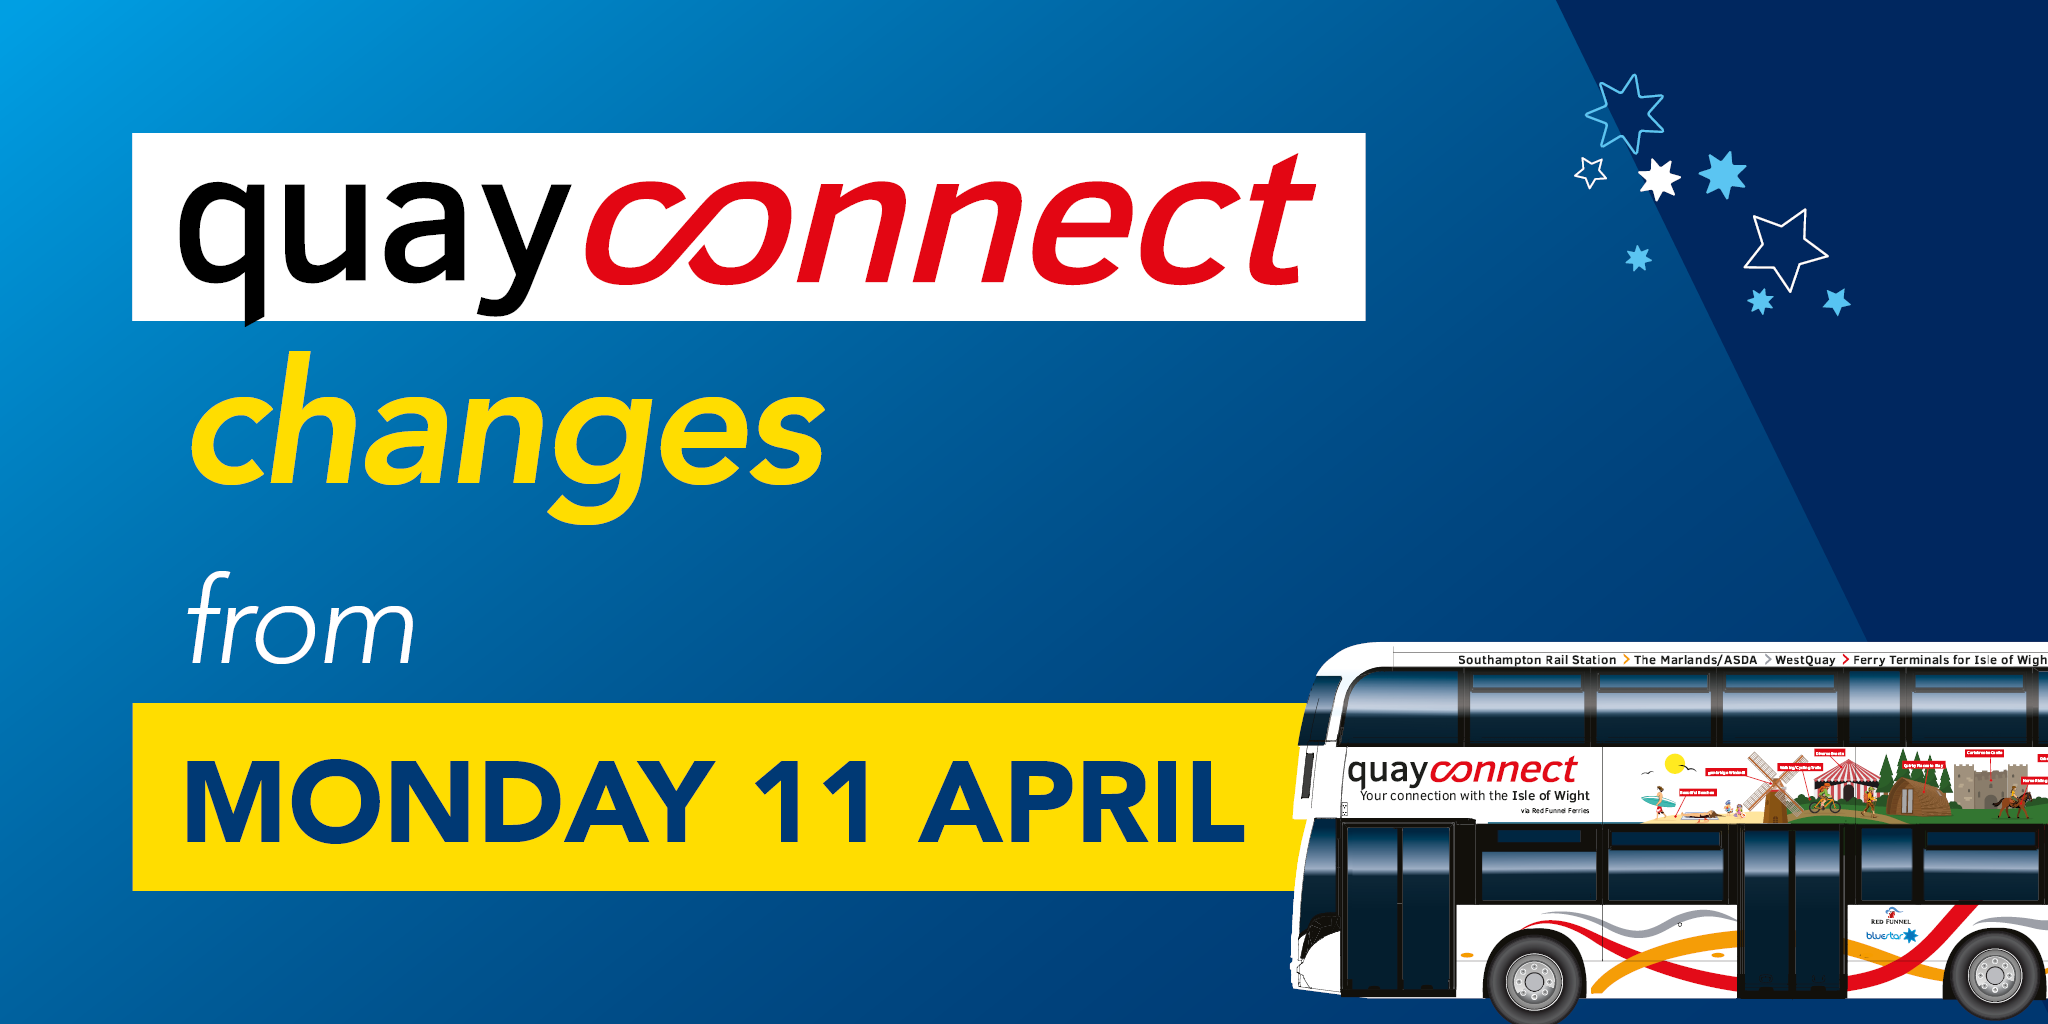 quayconnect changes from monday 11 april